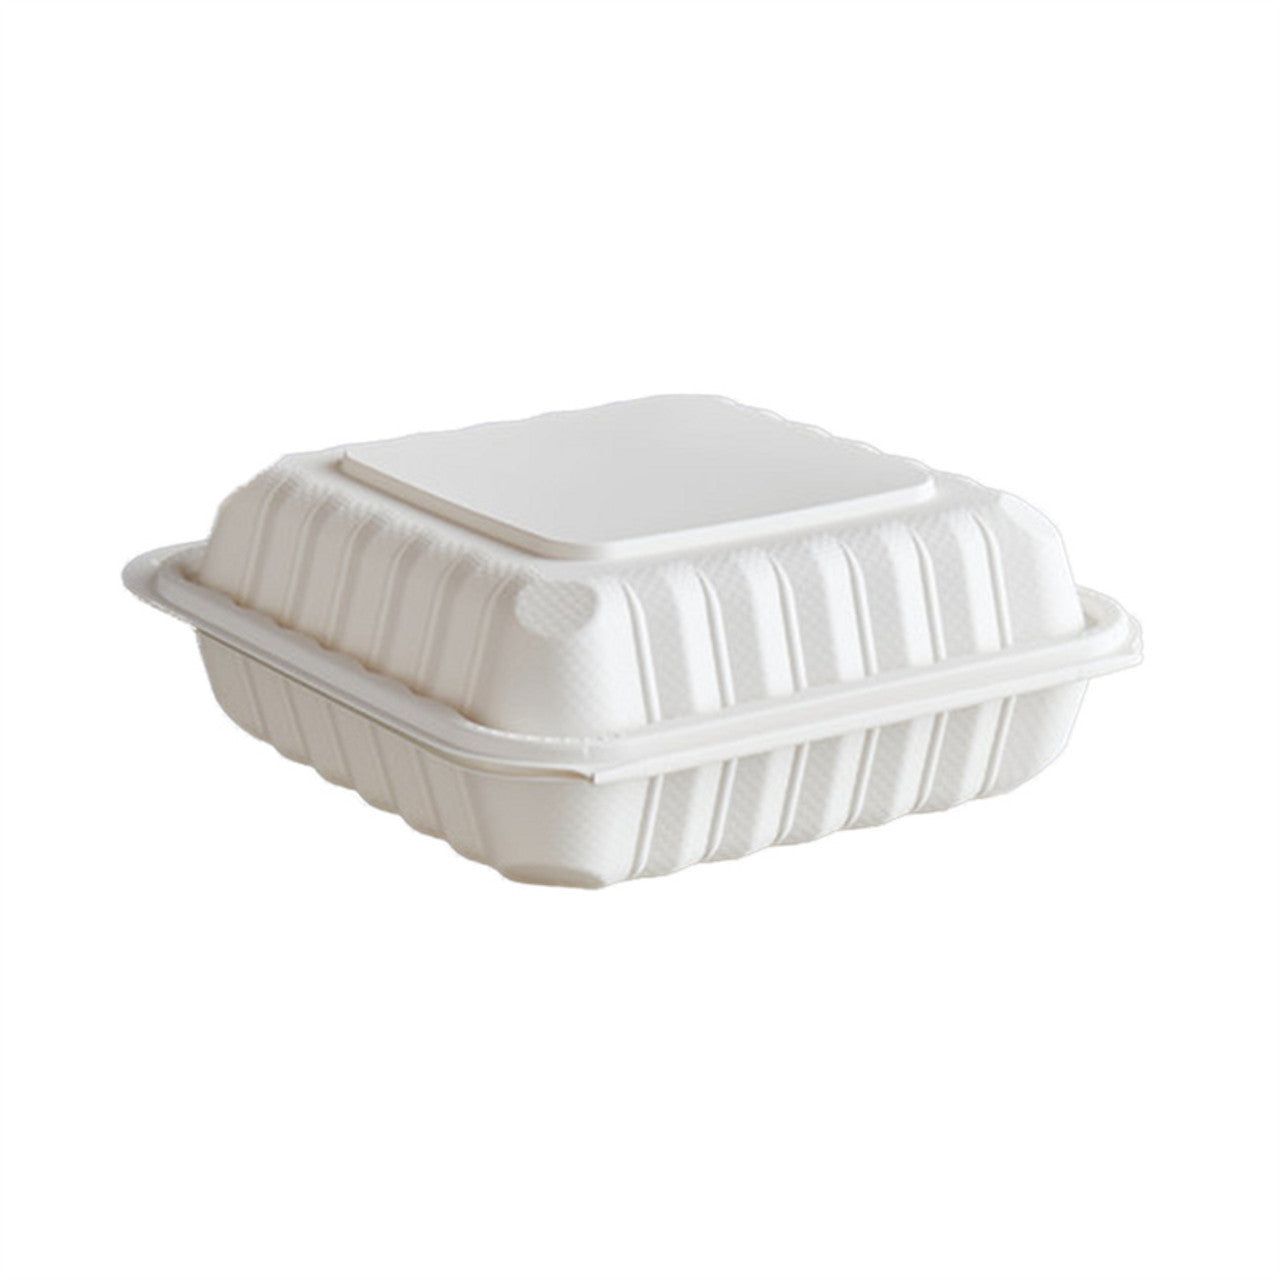 Sample 8" Microwaveable Plastic Clamshell Food Containers